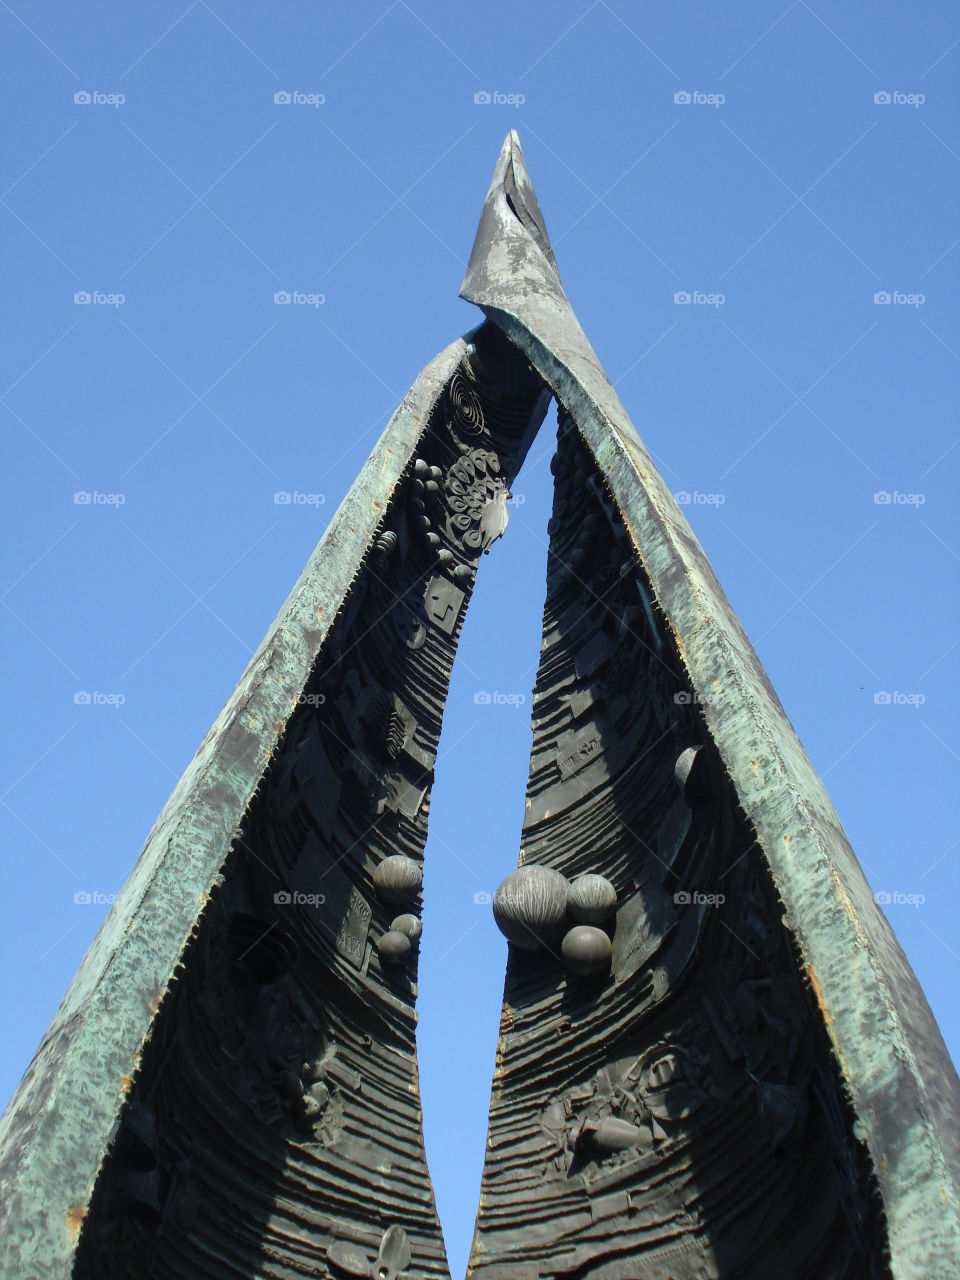 Sharp Top of a Budapest Statue